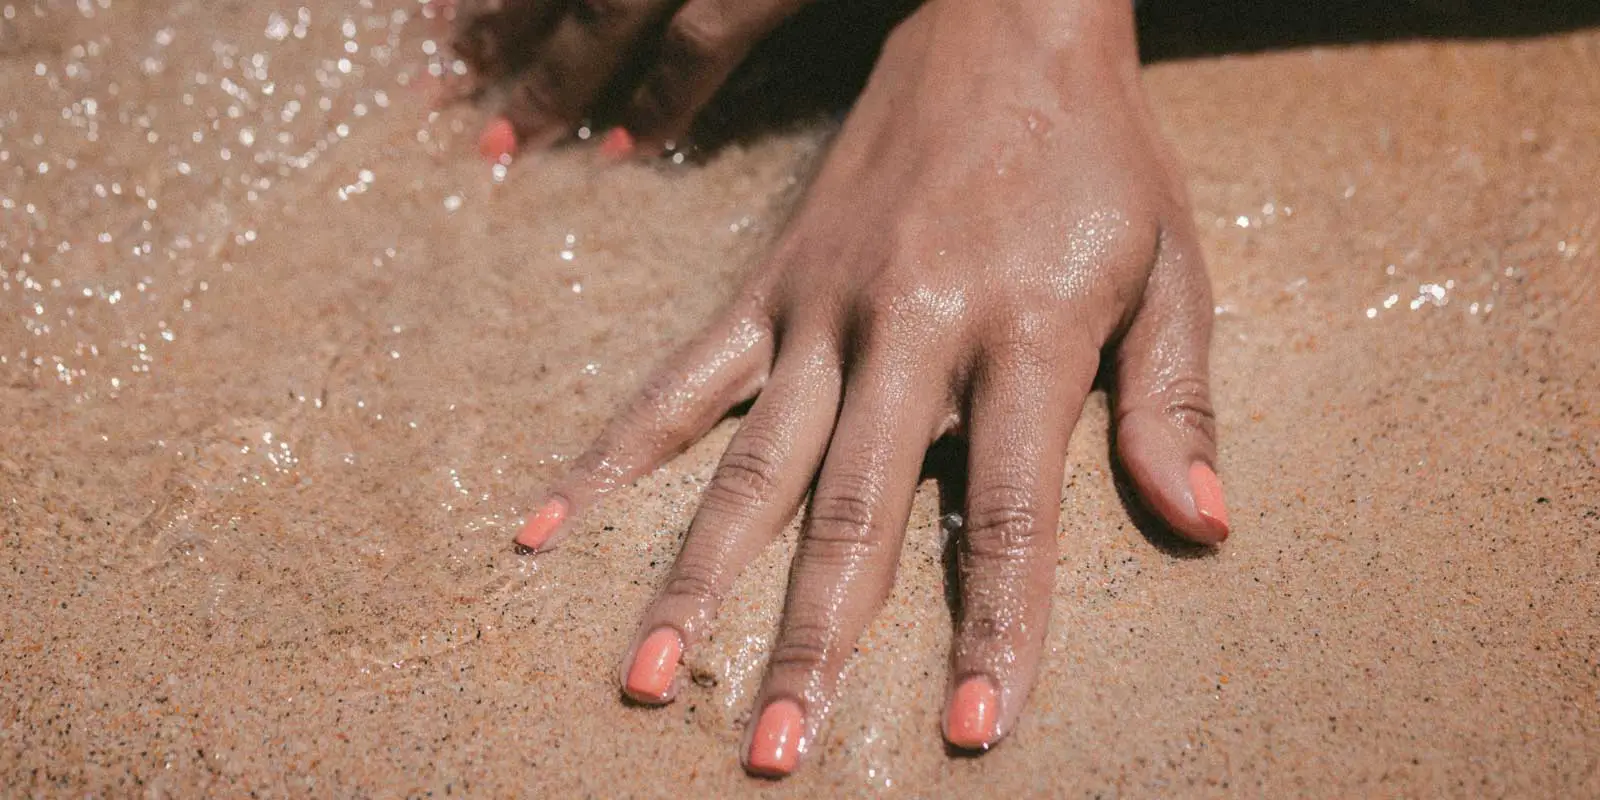 Close up of a women's freshly manicured hands set against a sandy beach.